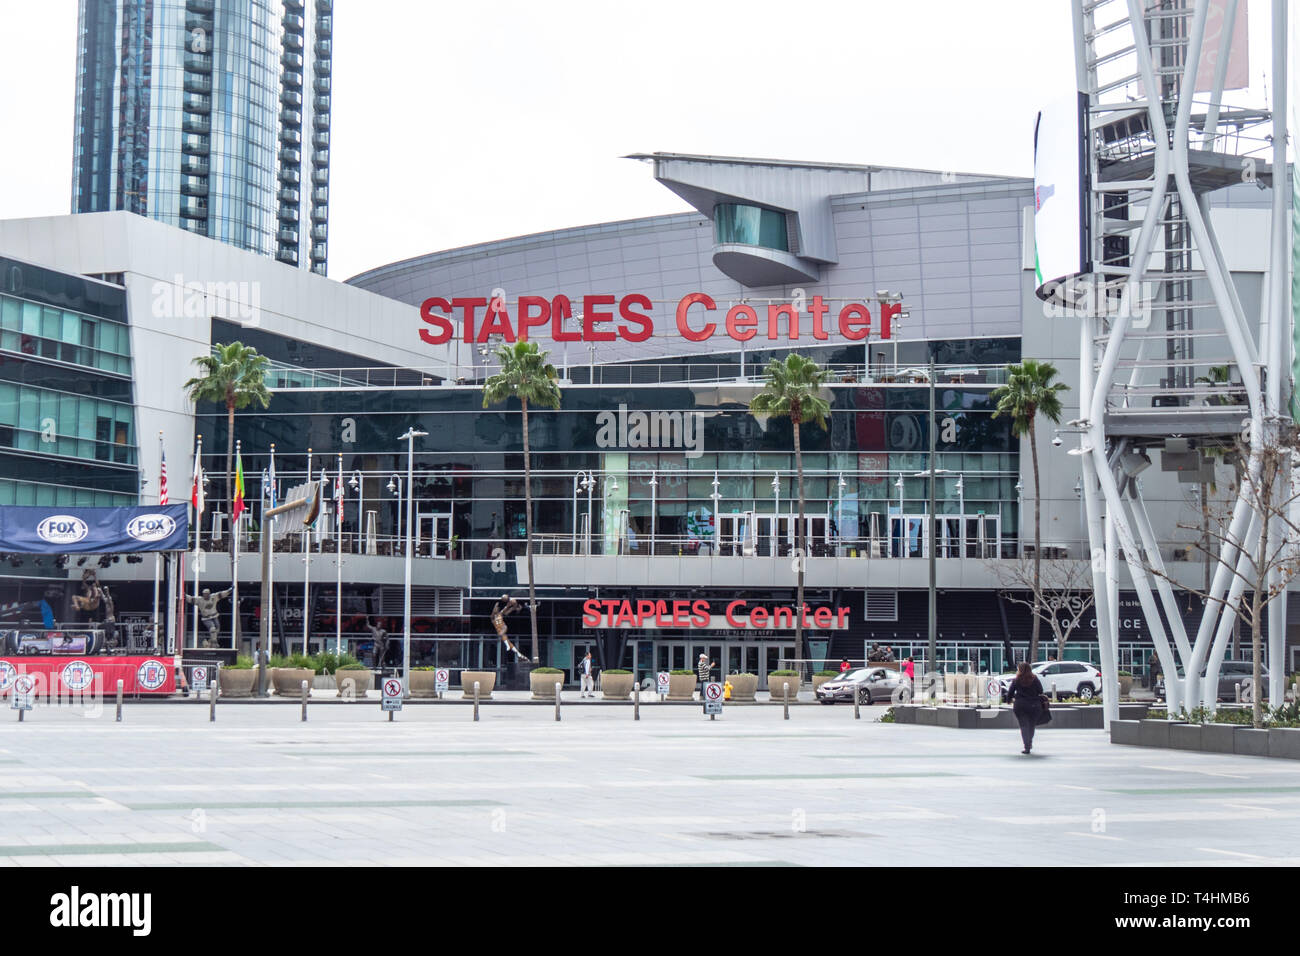 Staples Center at Downtown Los Angeles - CALIFORNIA, USA - MARCH 18, 2019 Stock Photo